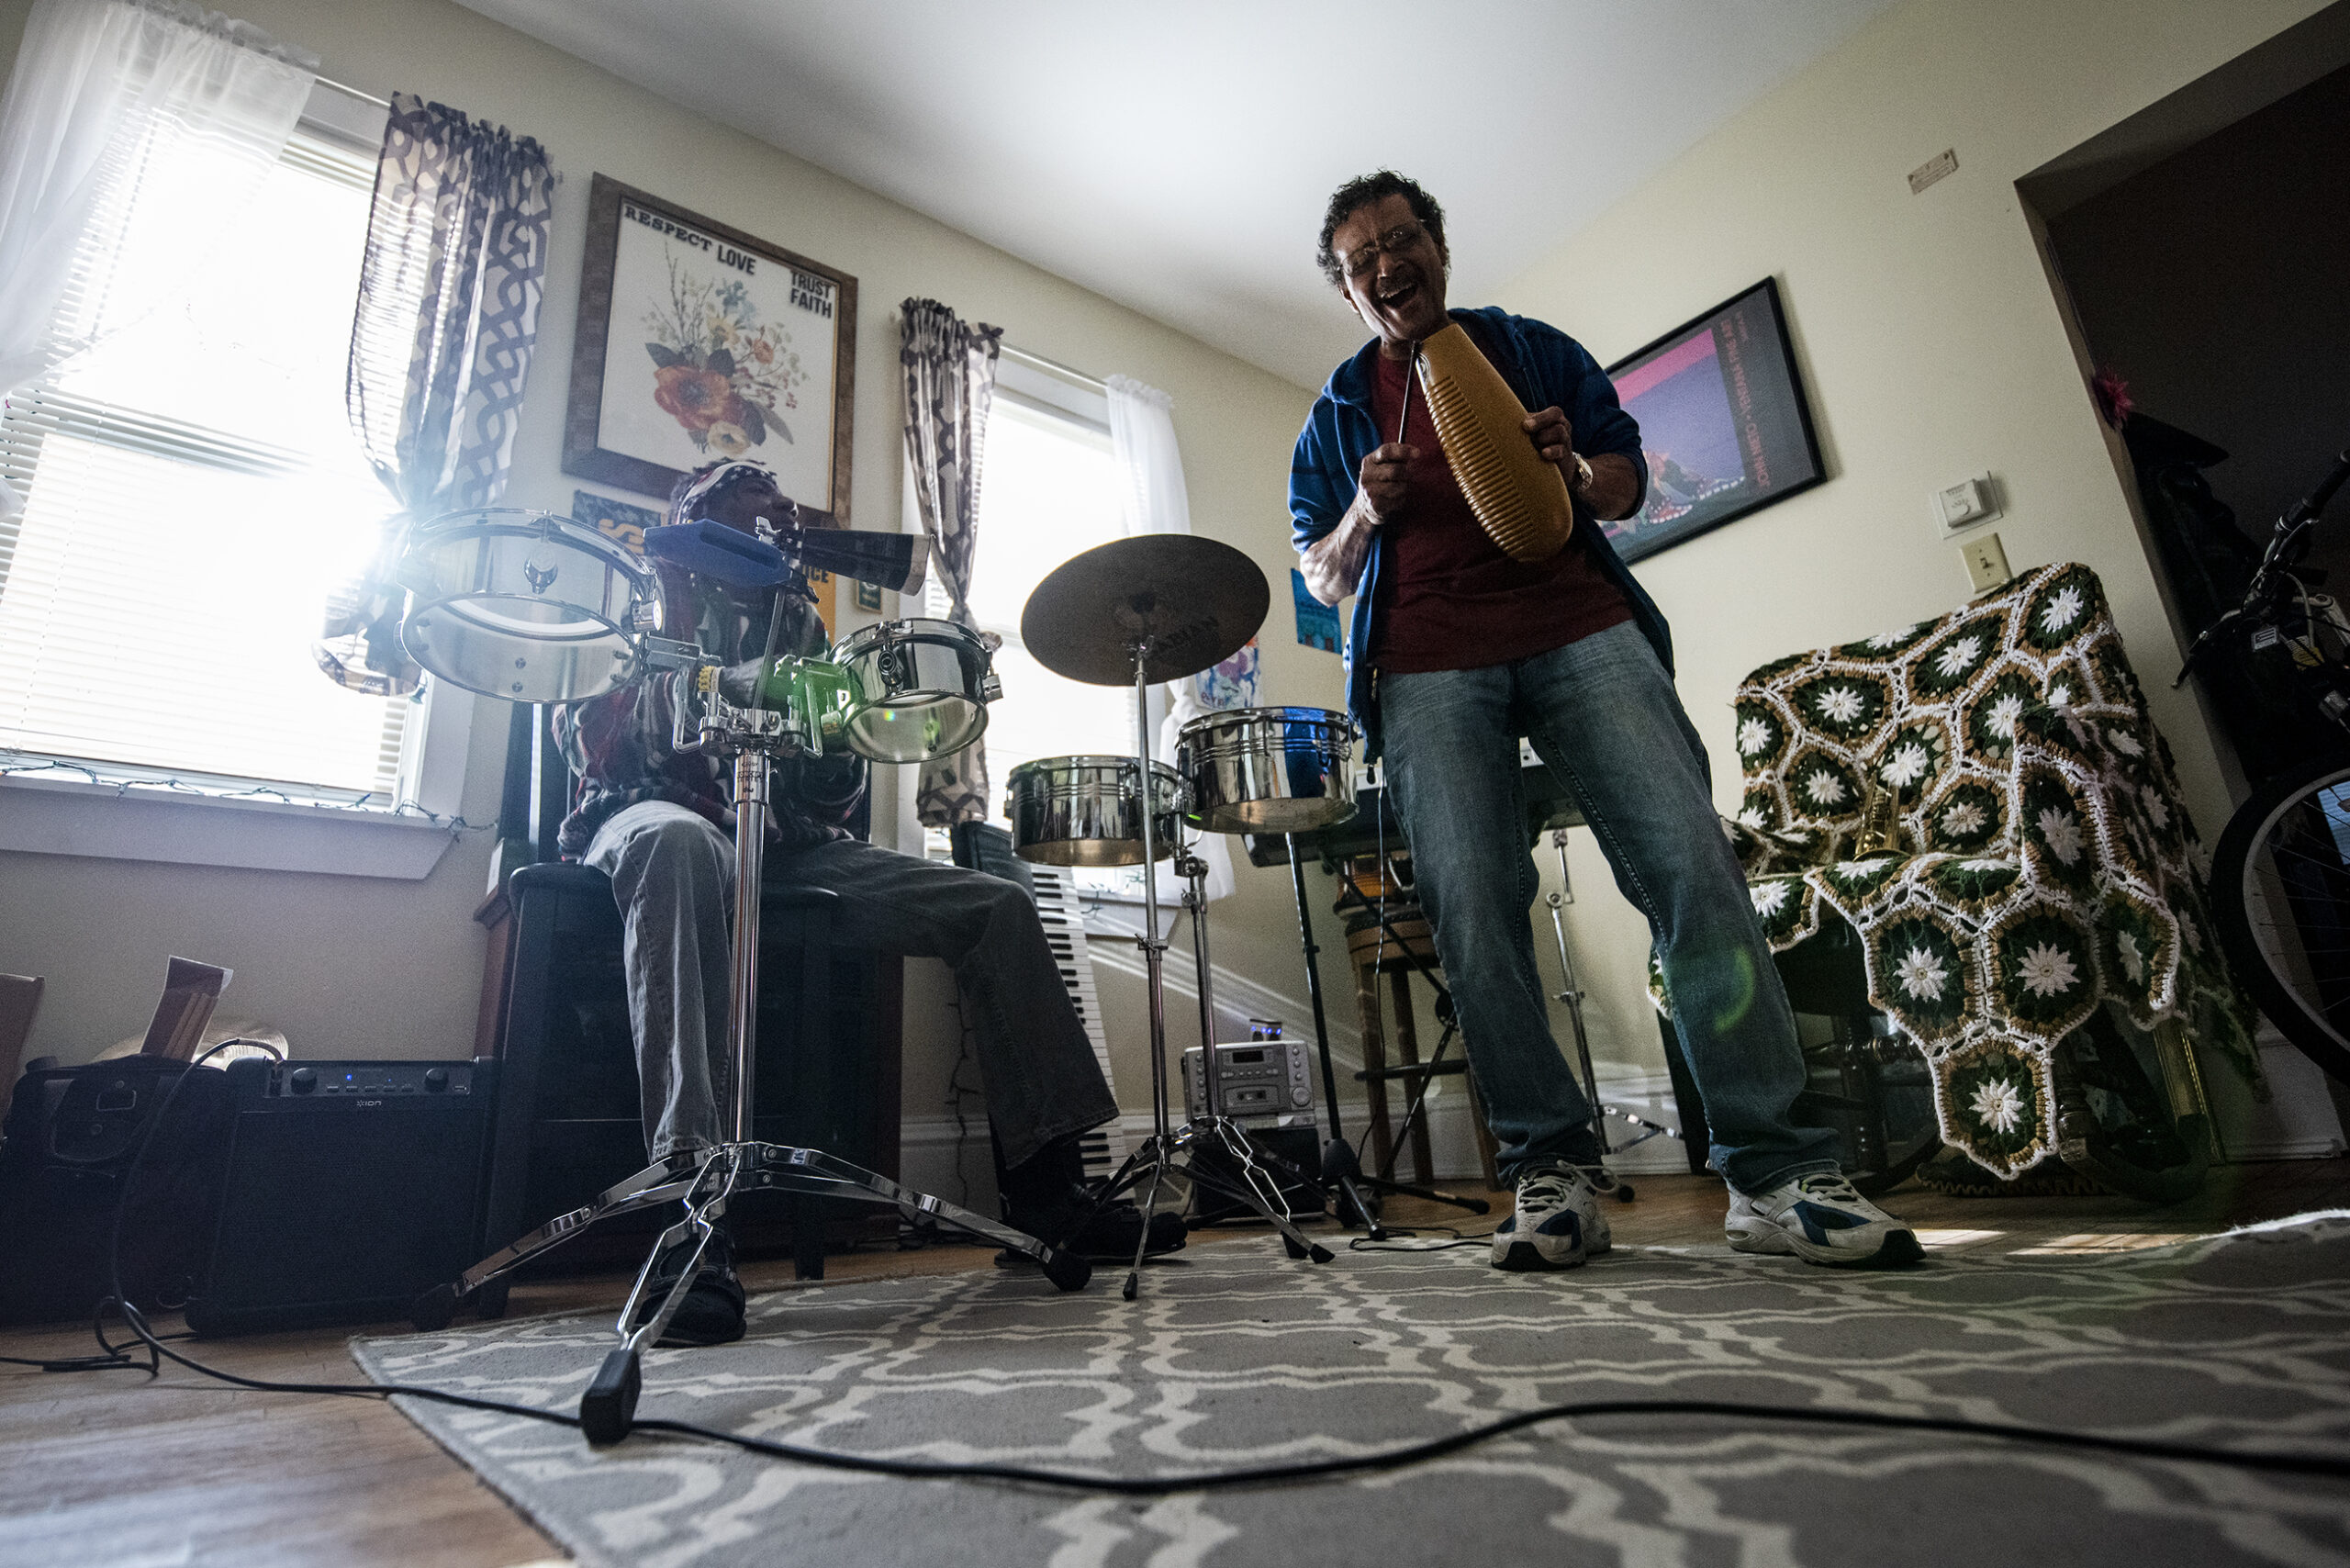 Cuban refugees play music in Pozo and Rodriguez's living room